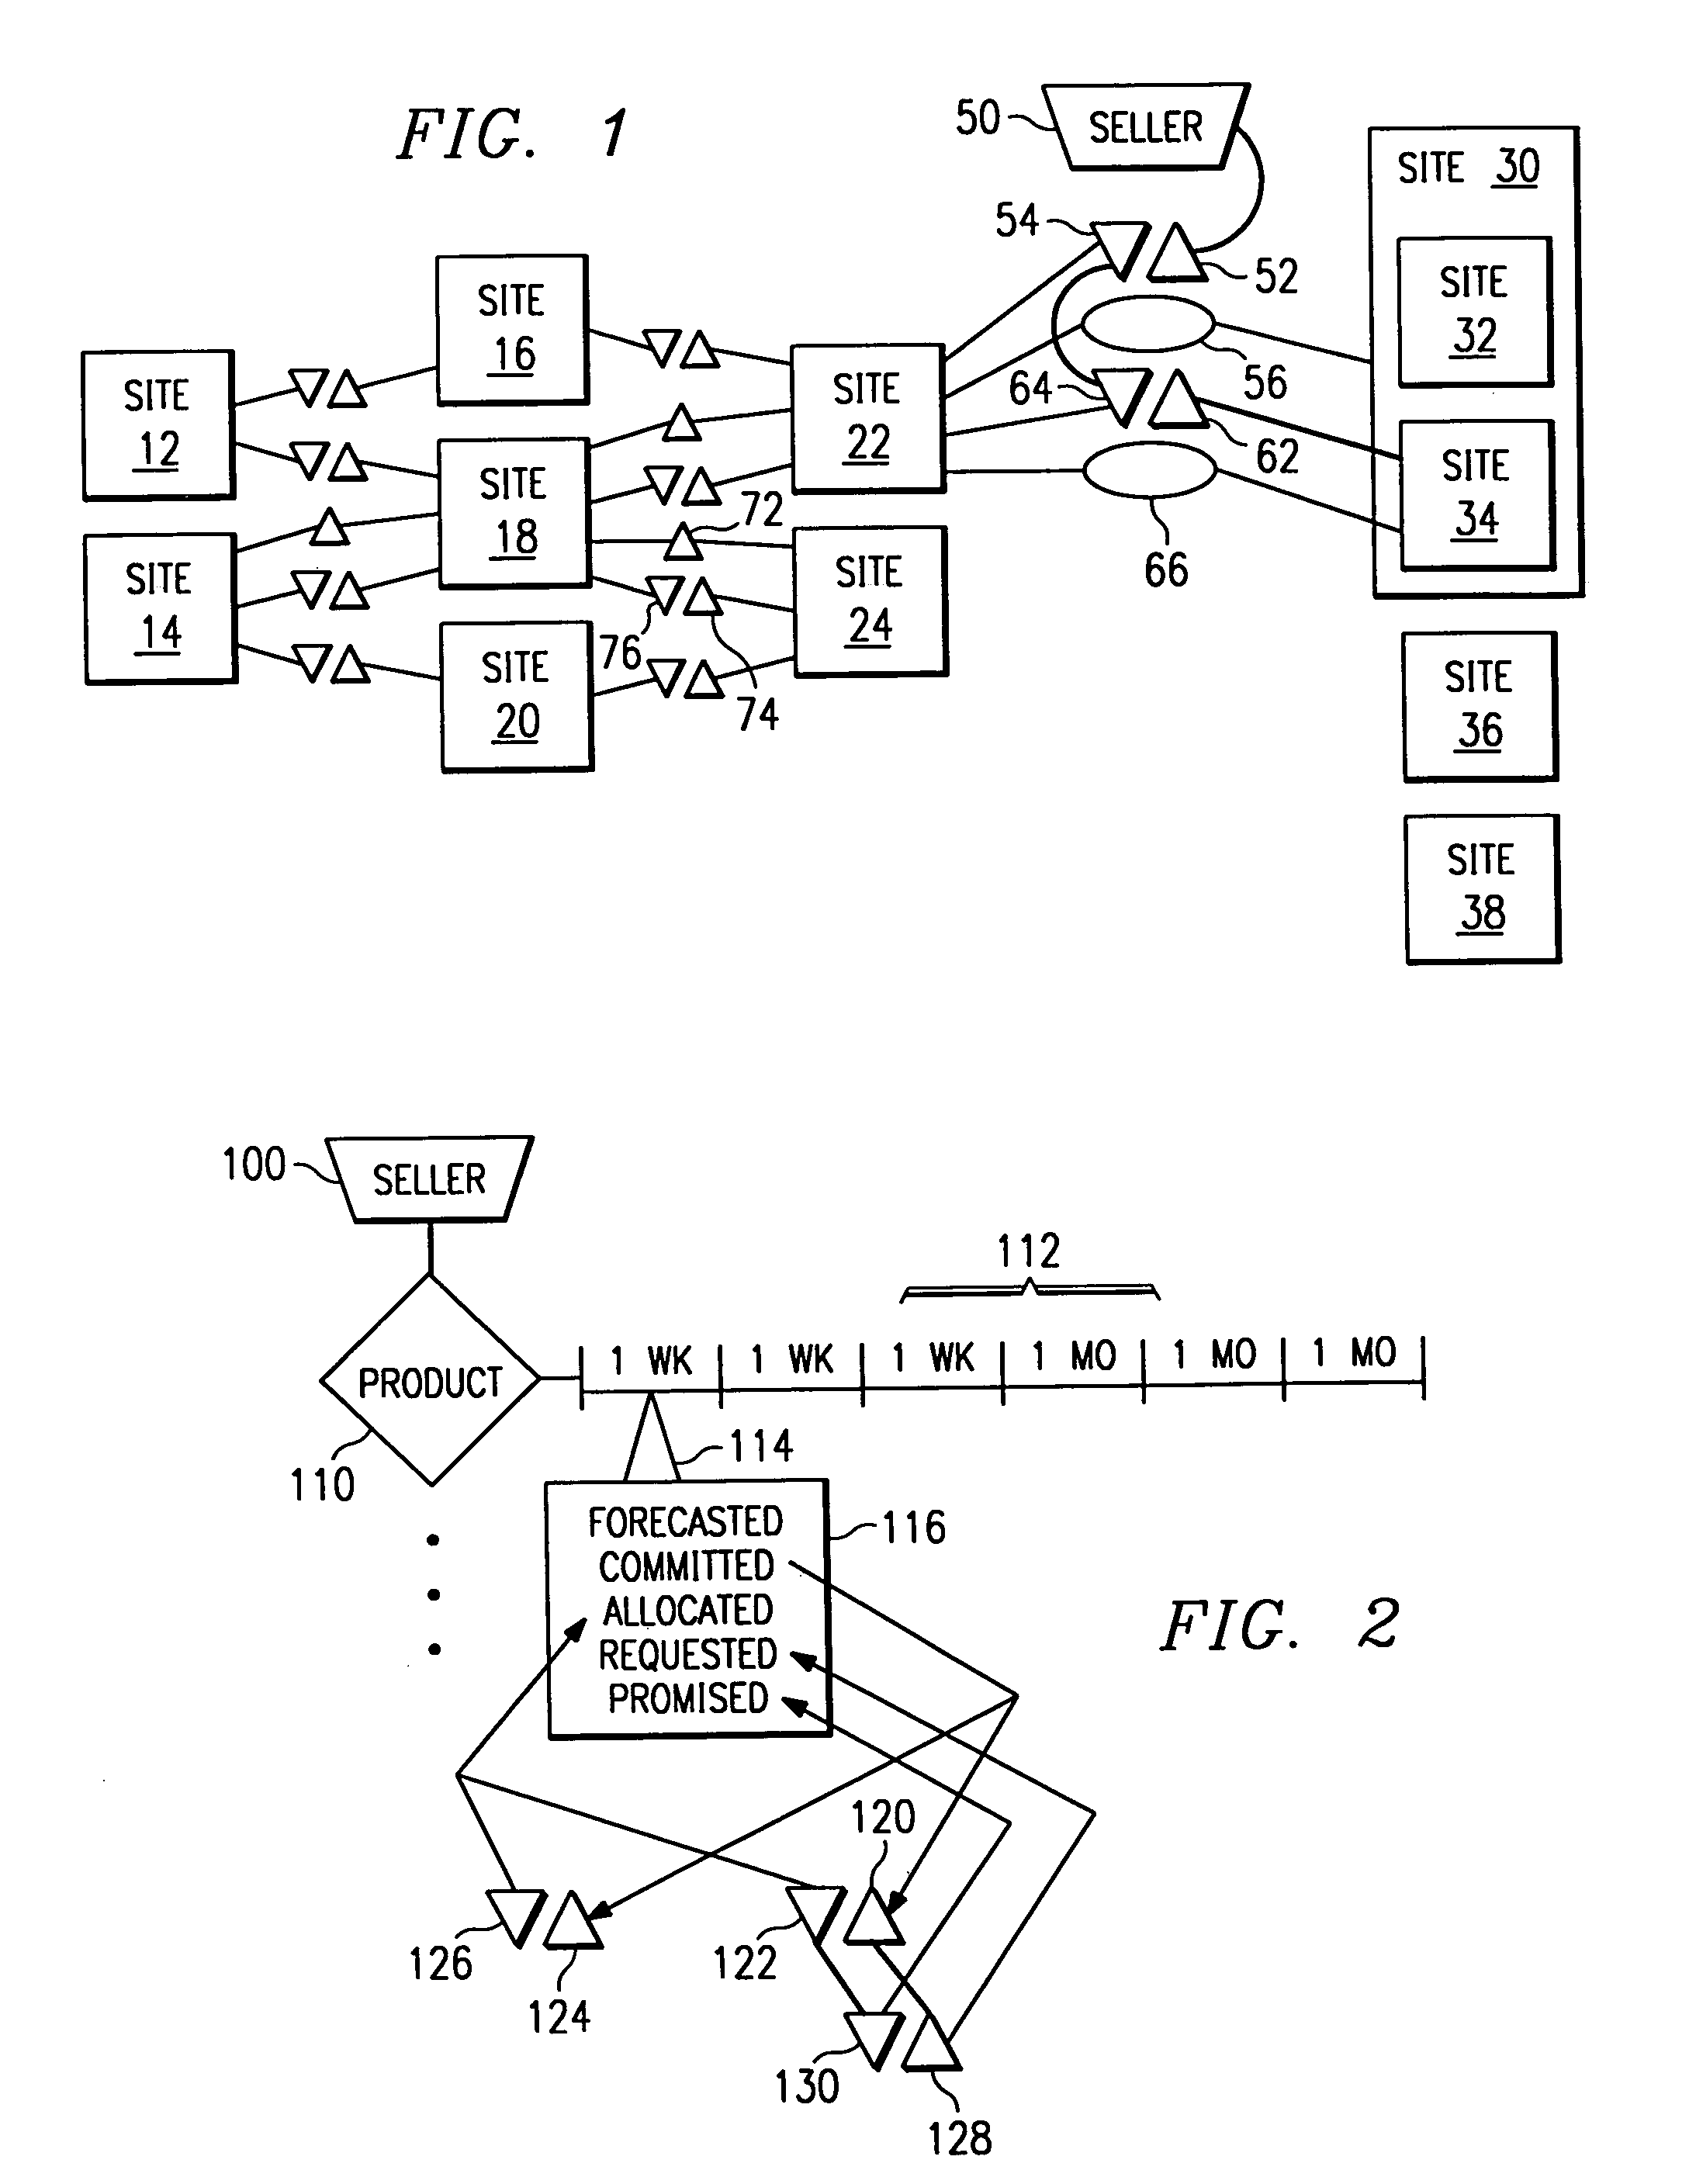 System and method for allocating manufactured products to sellers